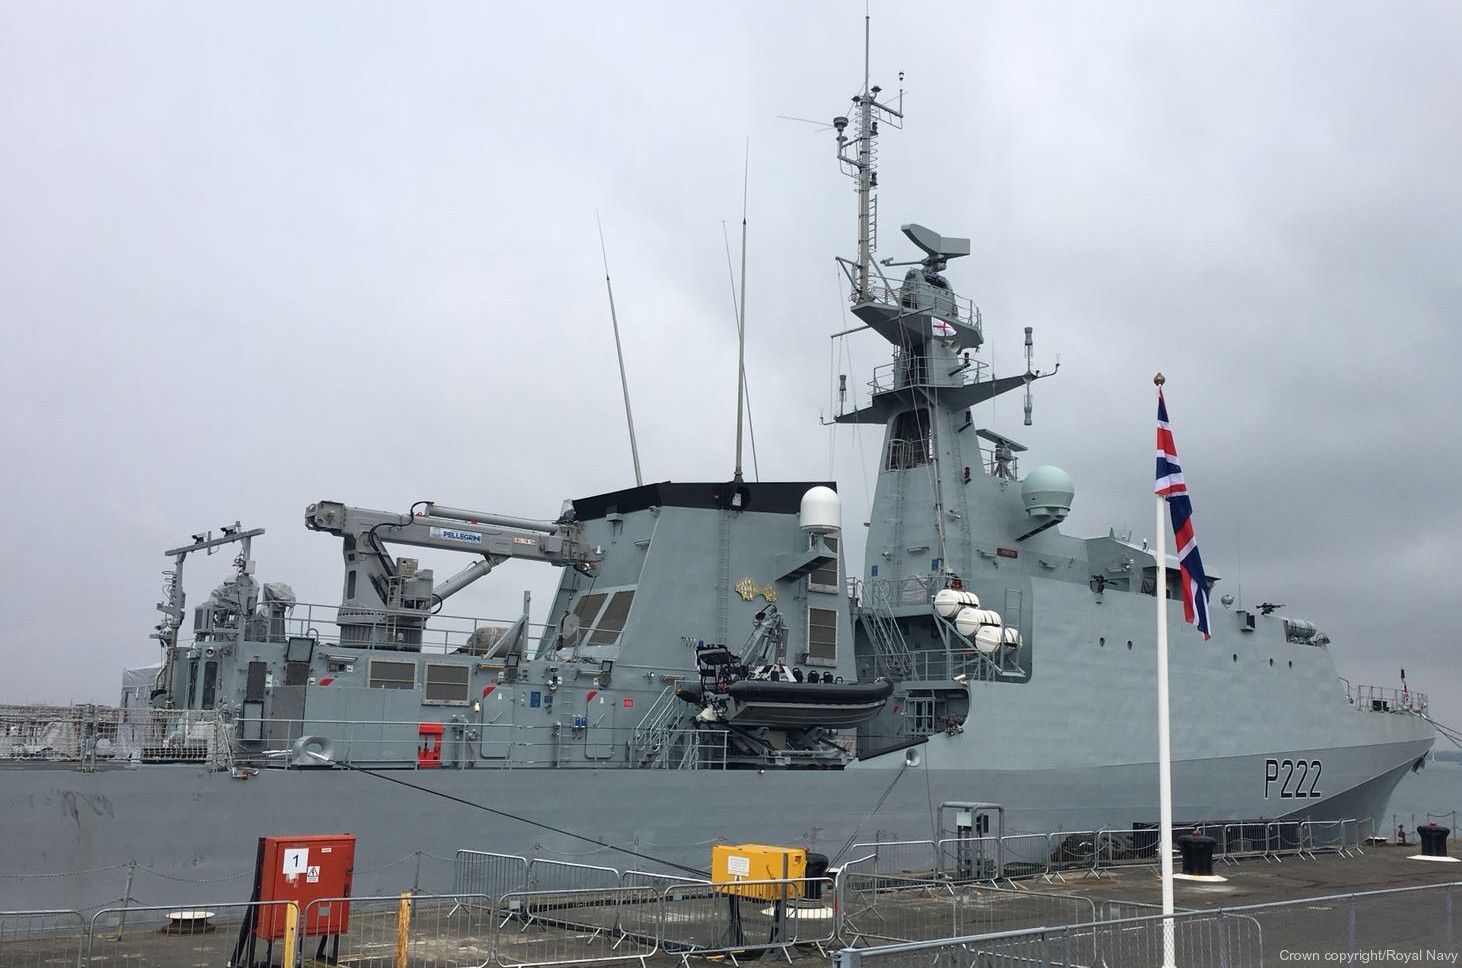 p222 hms forth river class offshore patrol vessel opv royal navy 17